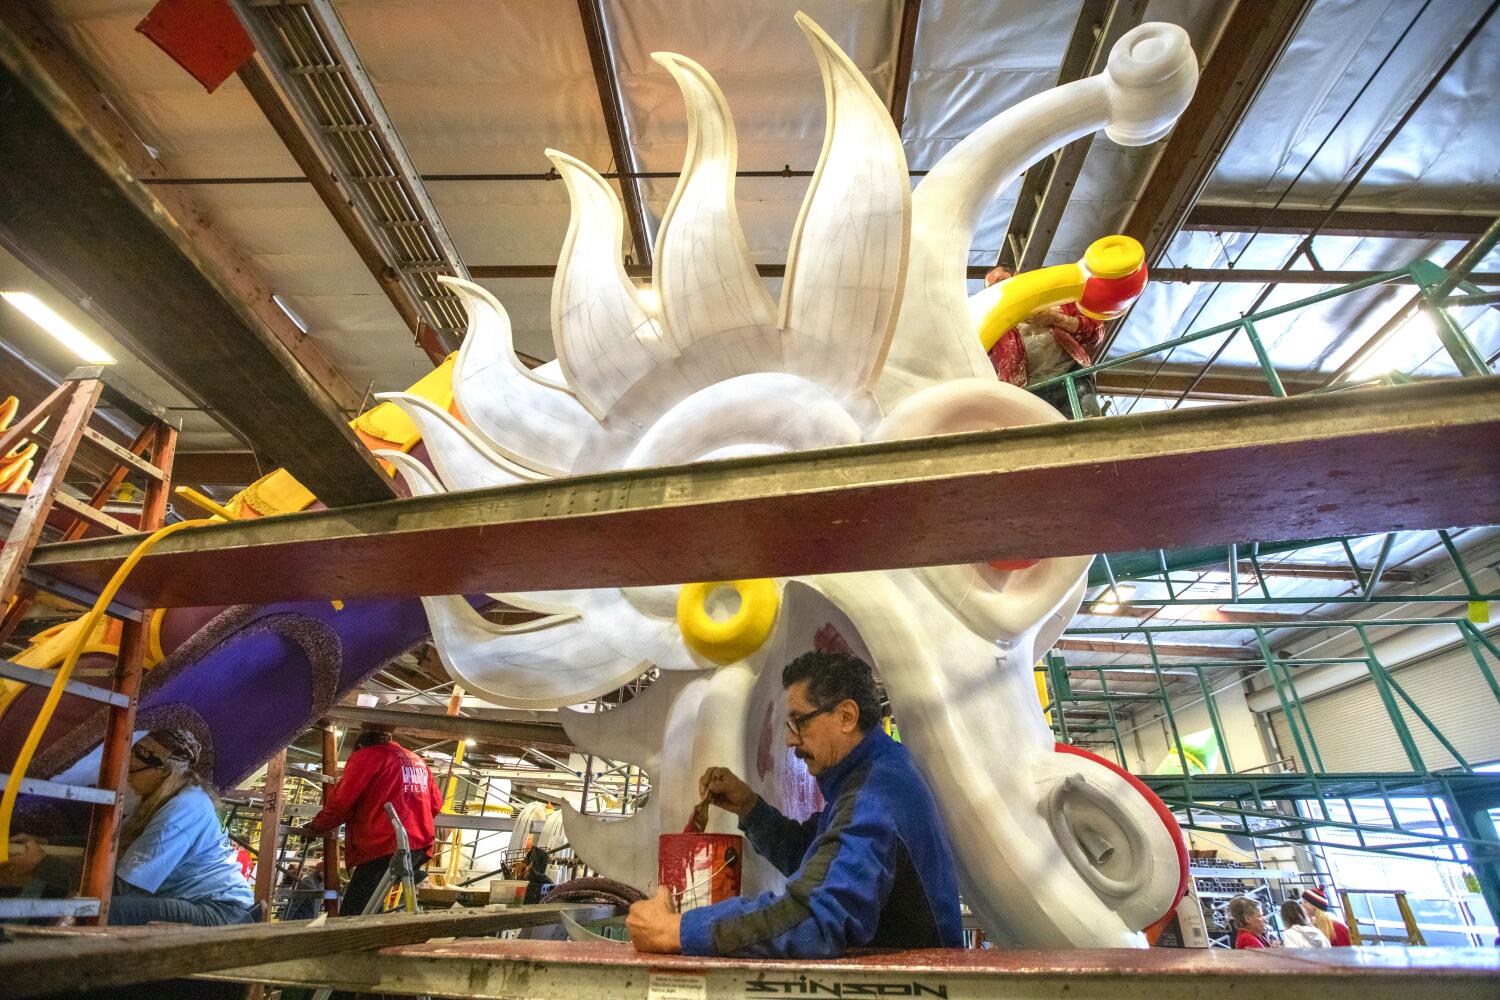 Award-winning parade float company will close after being dropped by Tournament of Roses